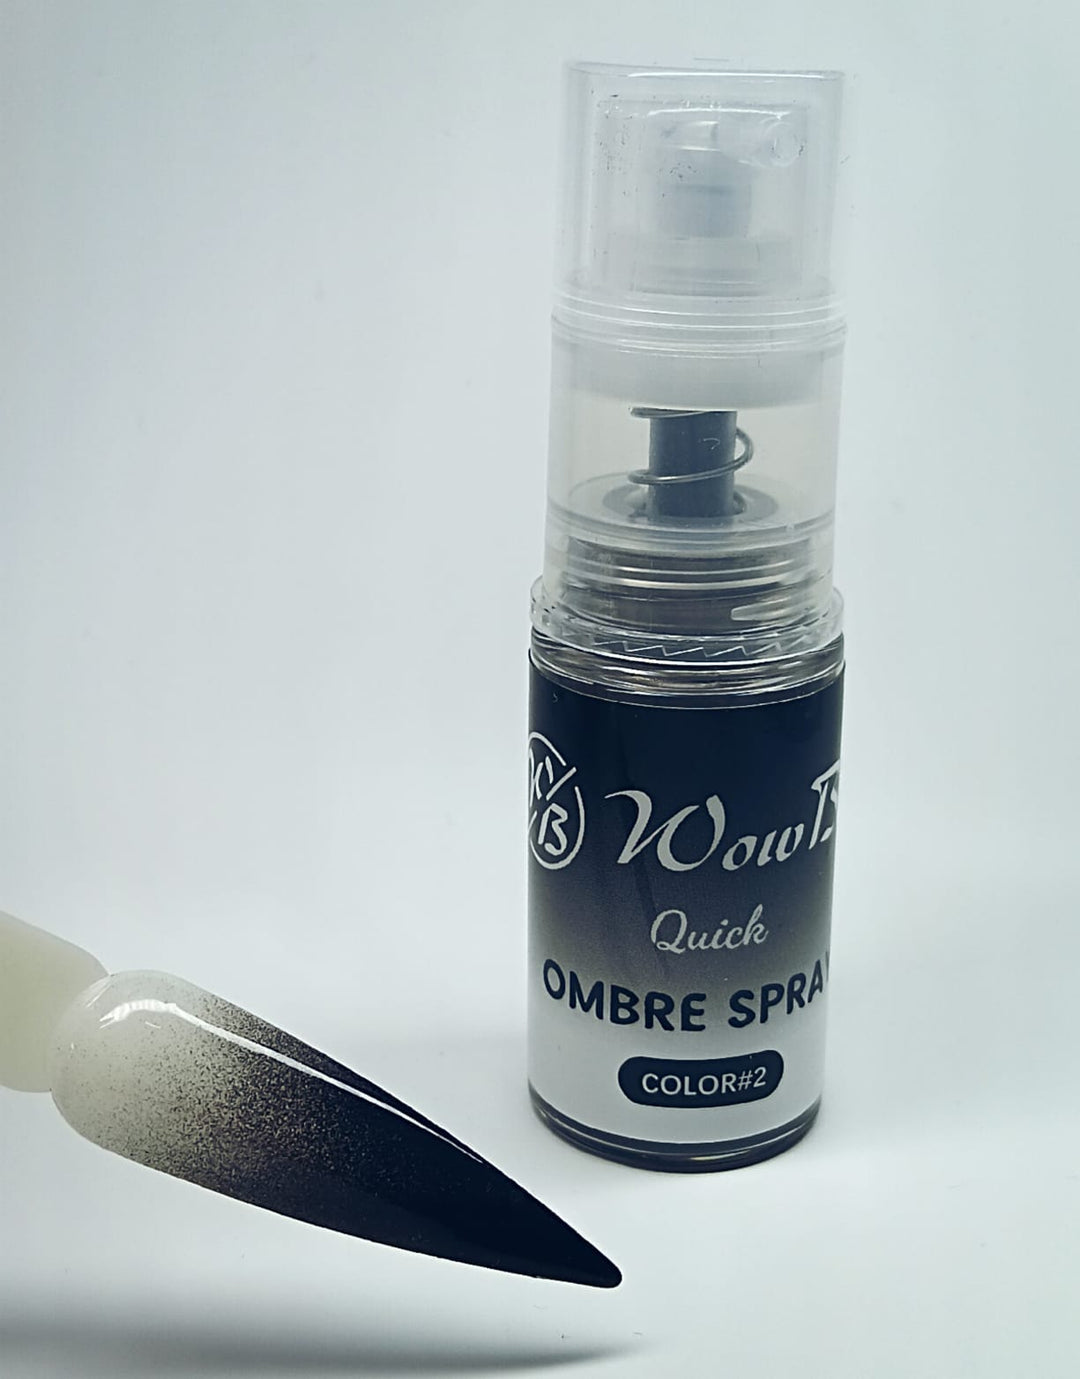 WowBao Nails Quick Ombre Spray - Black 02